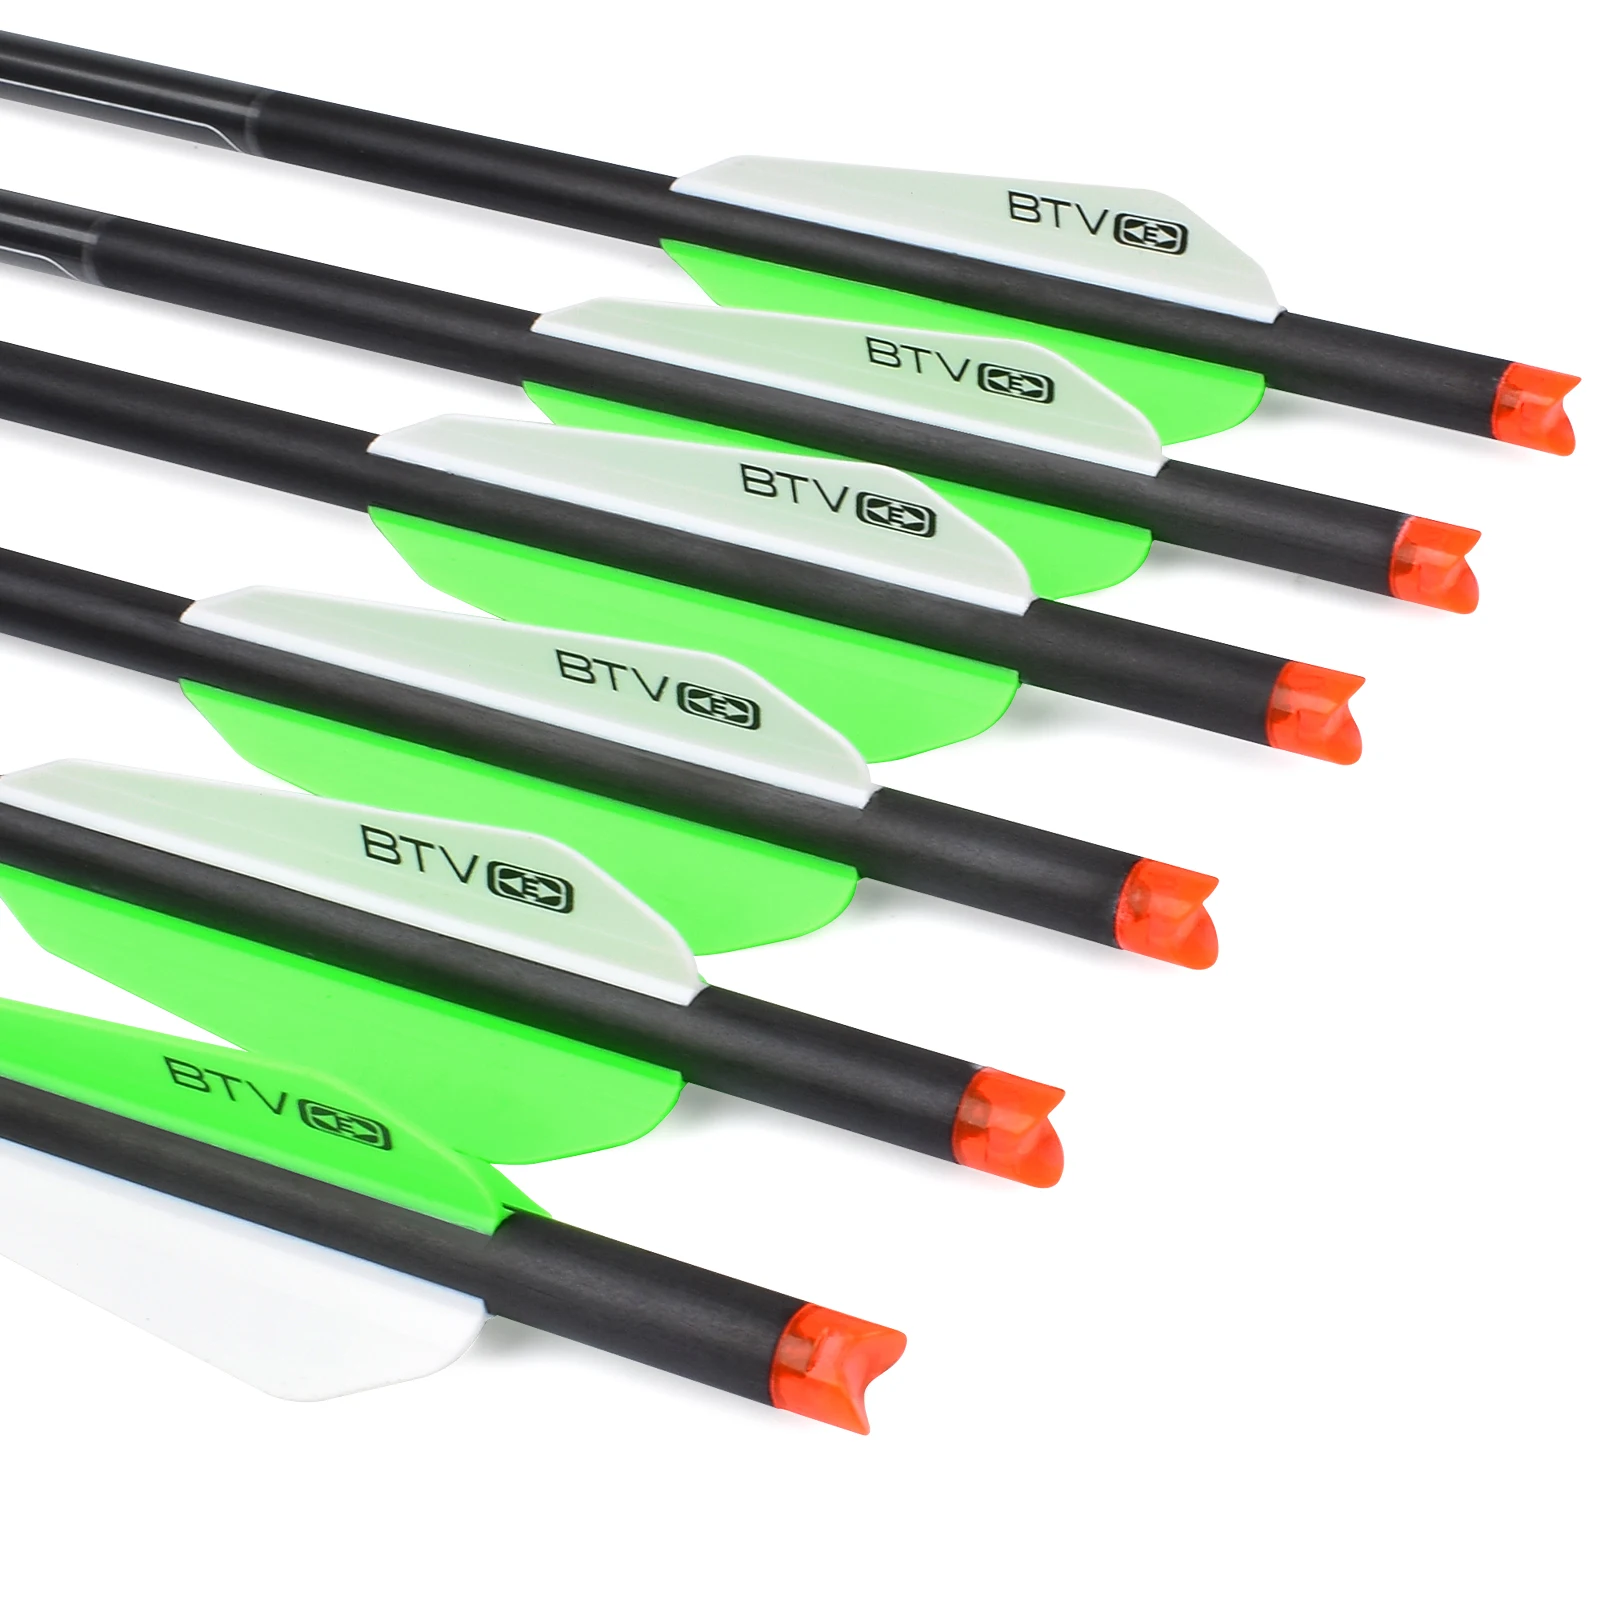 

6/12pcs 20" 22" Carbon Crossbow Bolts Arrows 8.8mm 125 Grain Screw Field Point 3" BTV Vane Archery Bow Outdoor Hunting